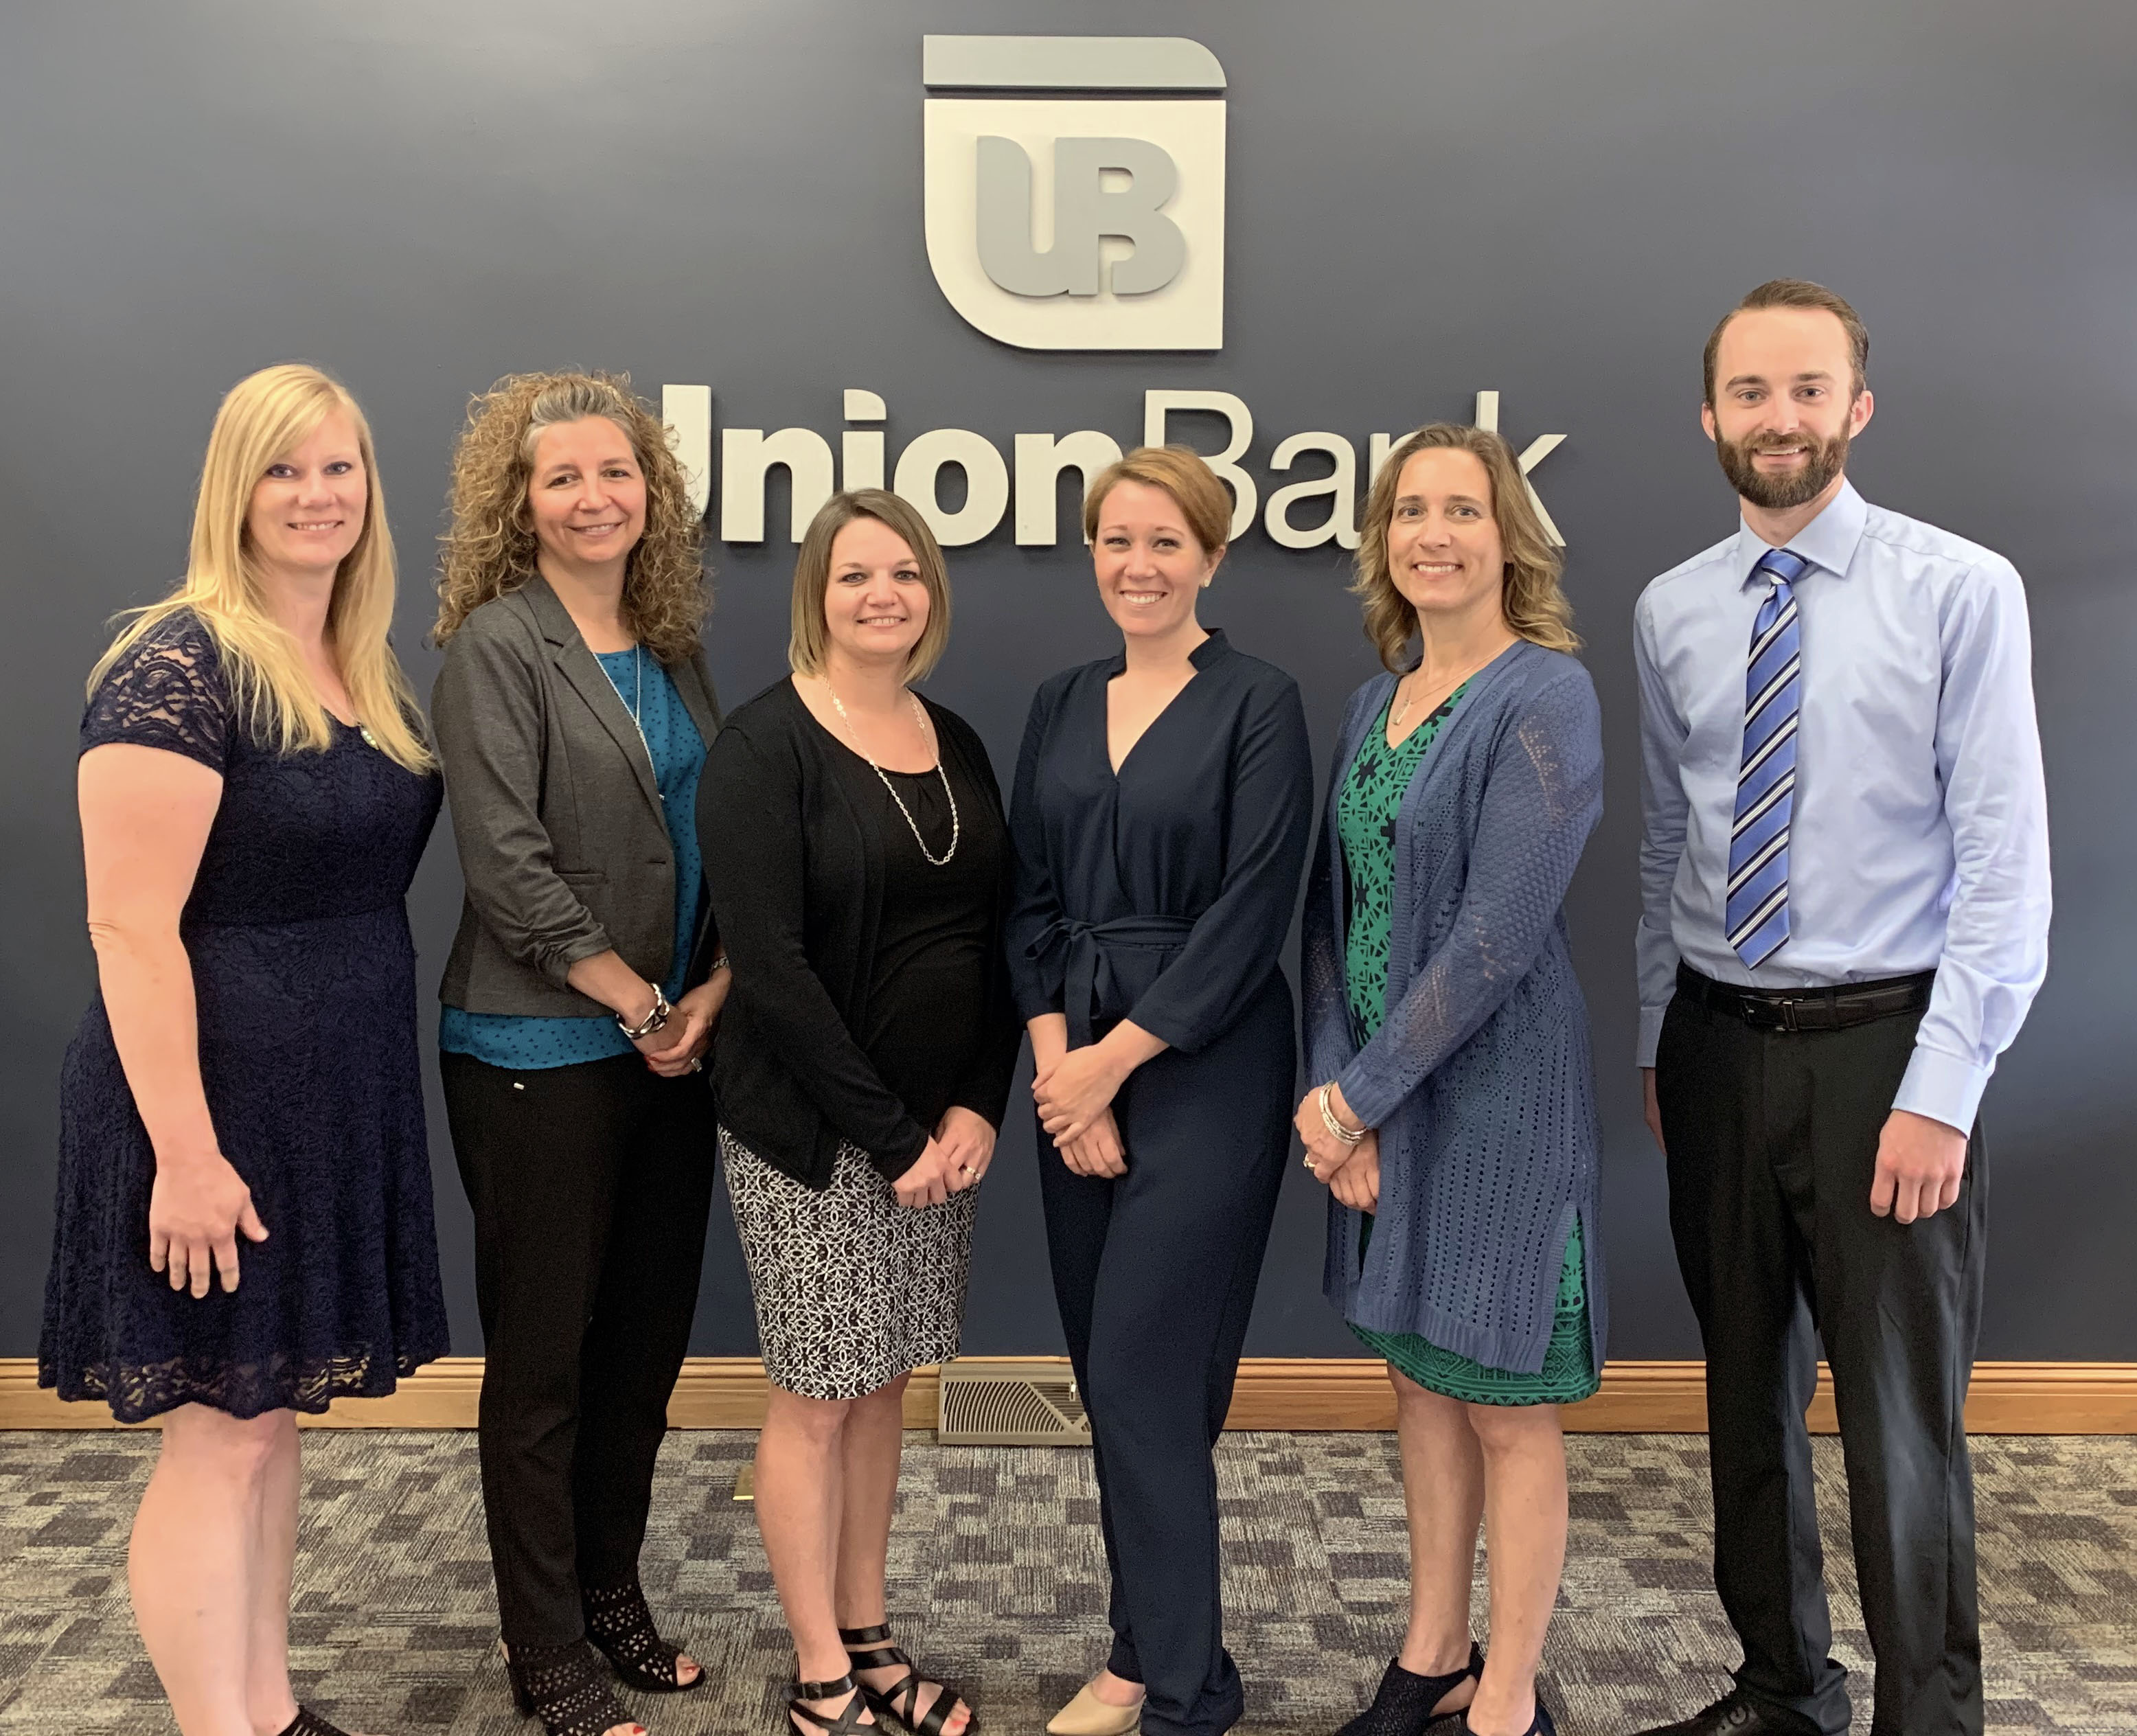 Image Description.  Union Bank announces six employee promotions.  Pictured from left to right are: Stephanie Brummette, Sandra Collison, Stephanie Joseph, Lindsay Farrell, Christine Fortier, and Derek Dickinson.